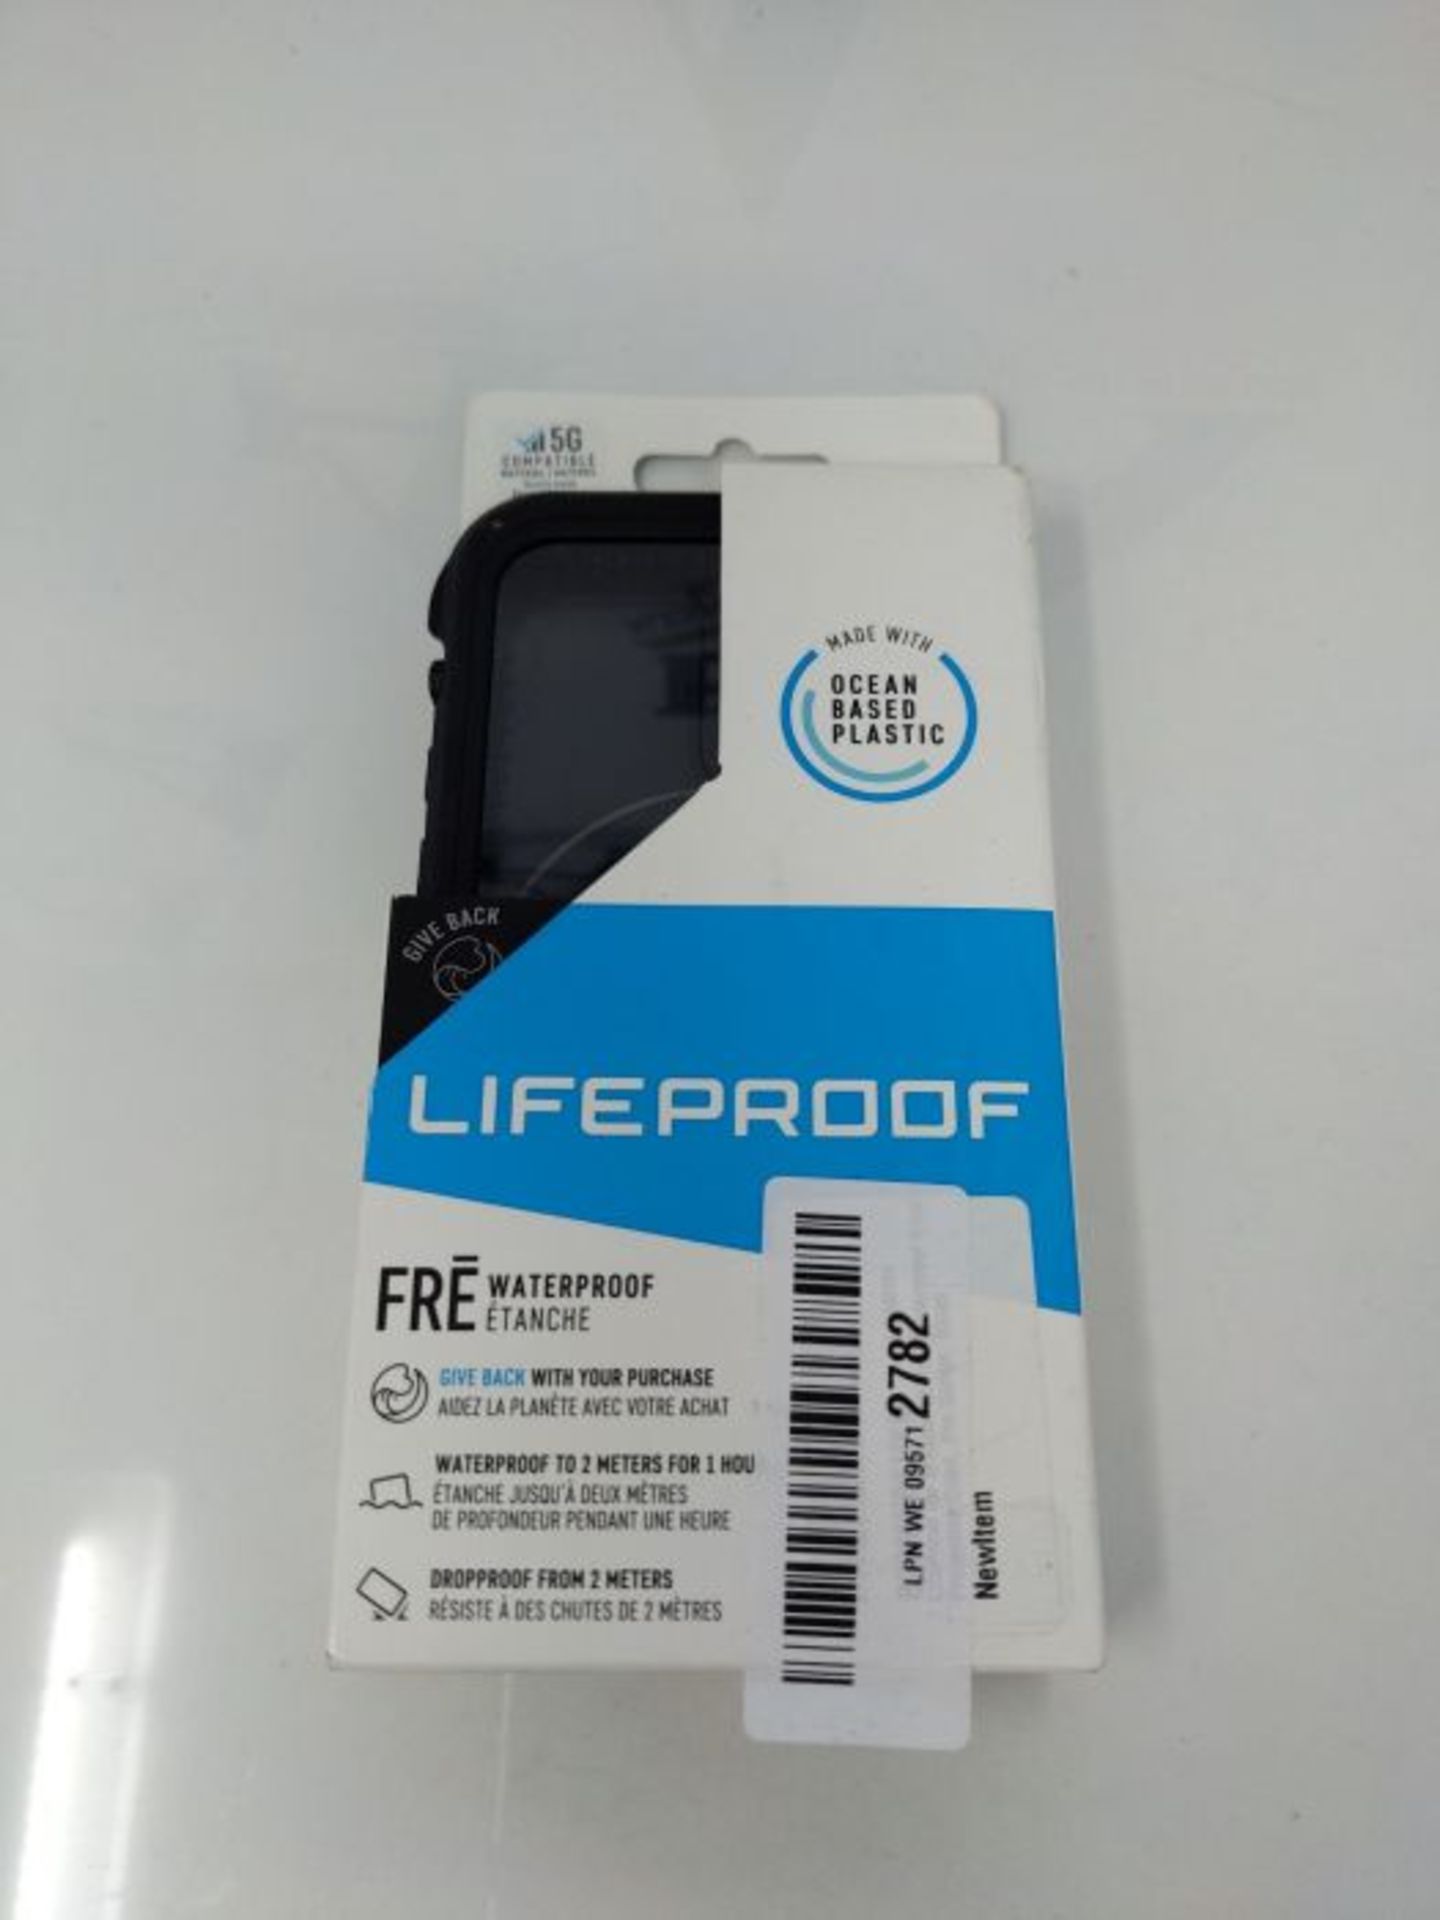 LifeProof for iPhone 12 Pro, Waterproof Drop Protective Case, Fre Series, Black - Image 8 of 9